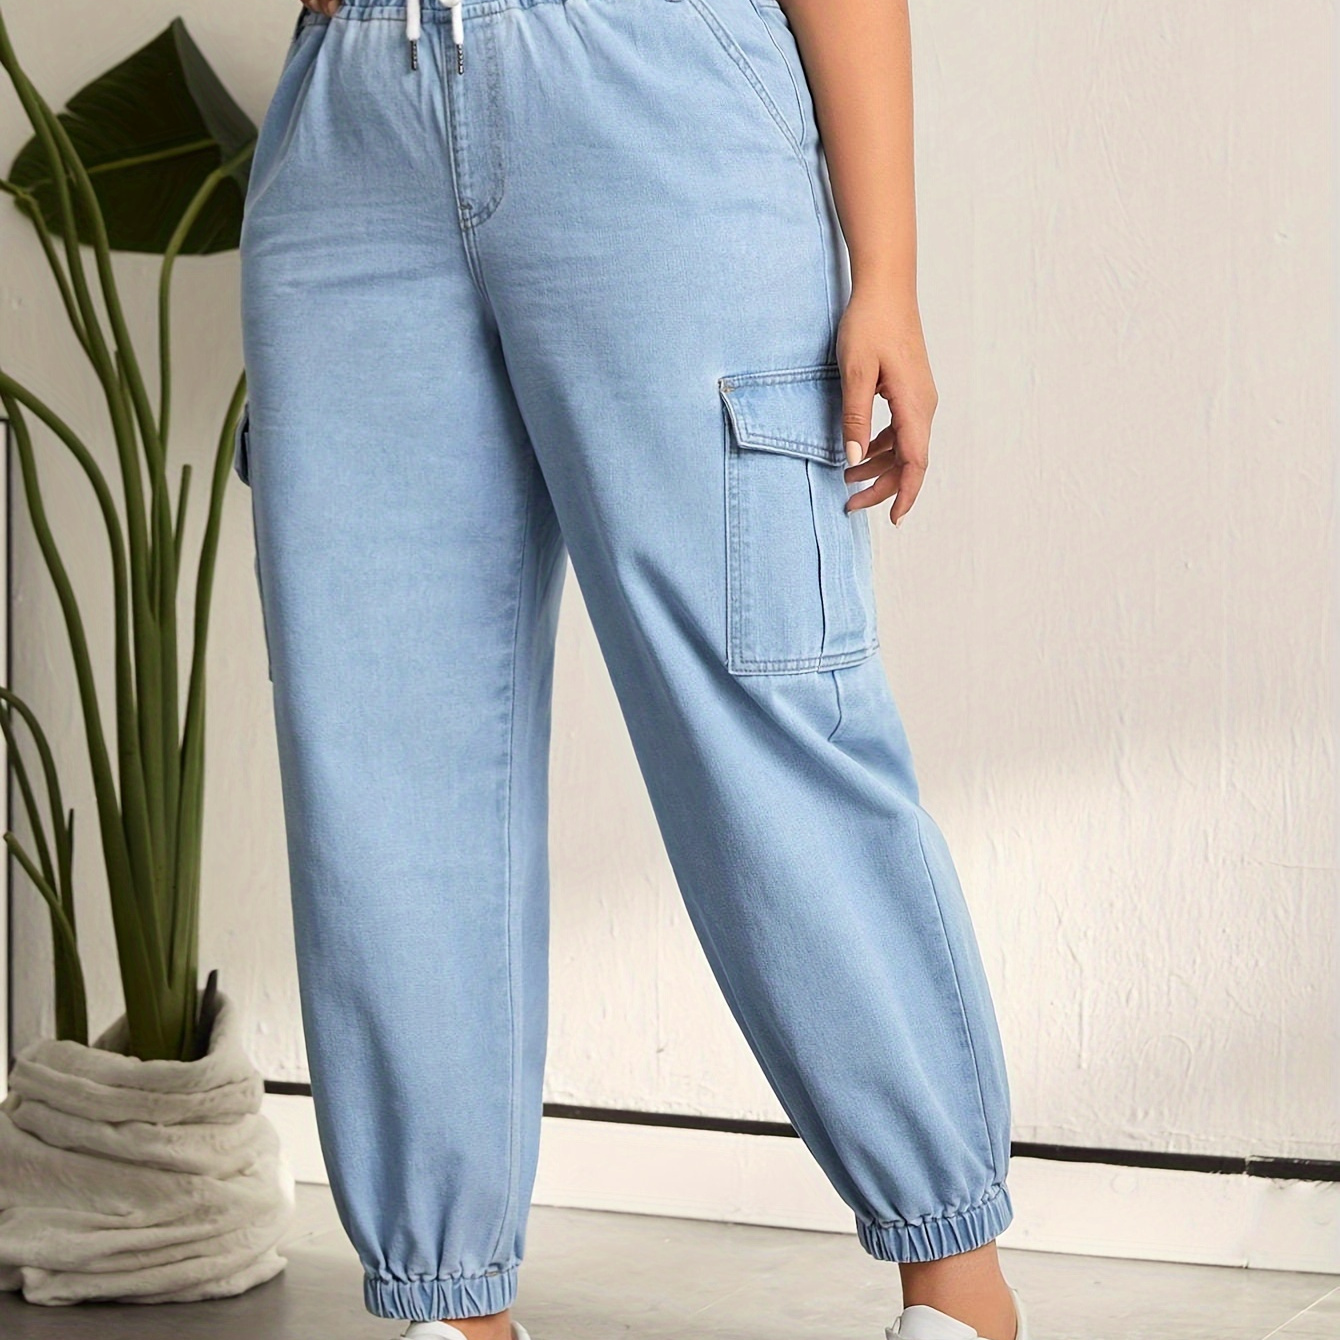 

Women's Casual Elastic Ankle Cuff Denim Jogger Jeans, Multiple Pockets, Comfortable Drawstring Waistband, Light Blue Stylish Pants For Everyday Wear